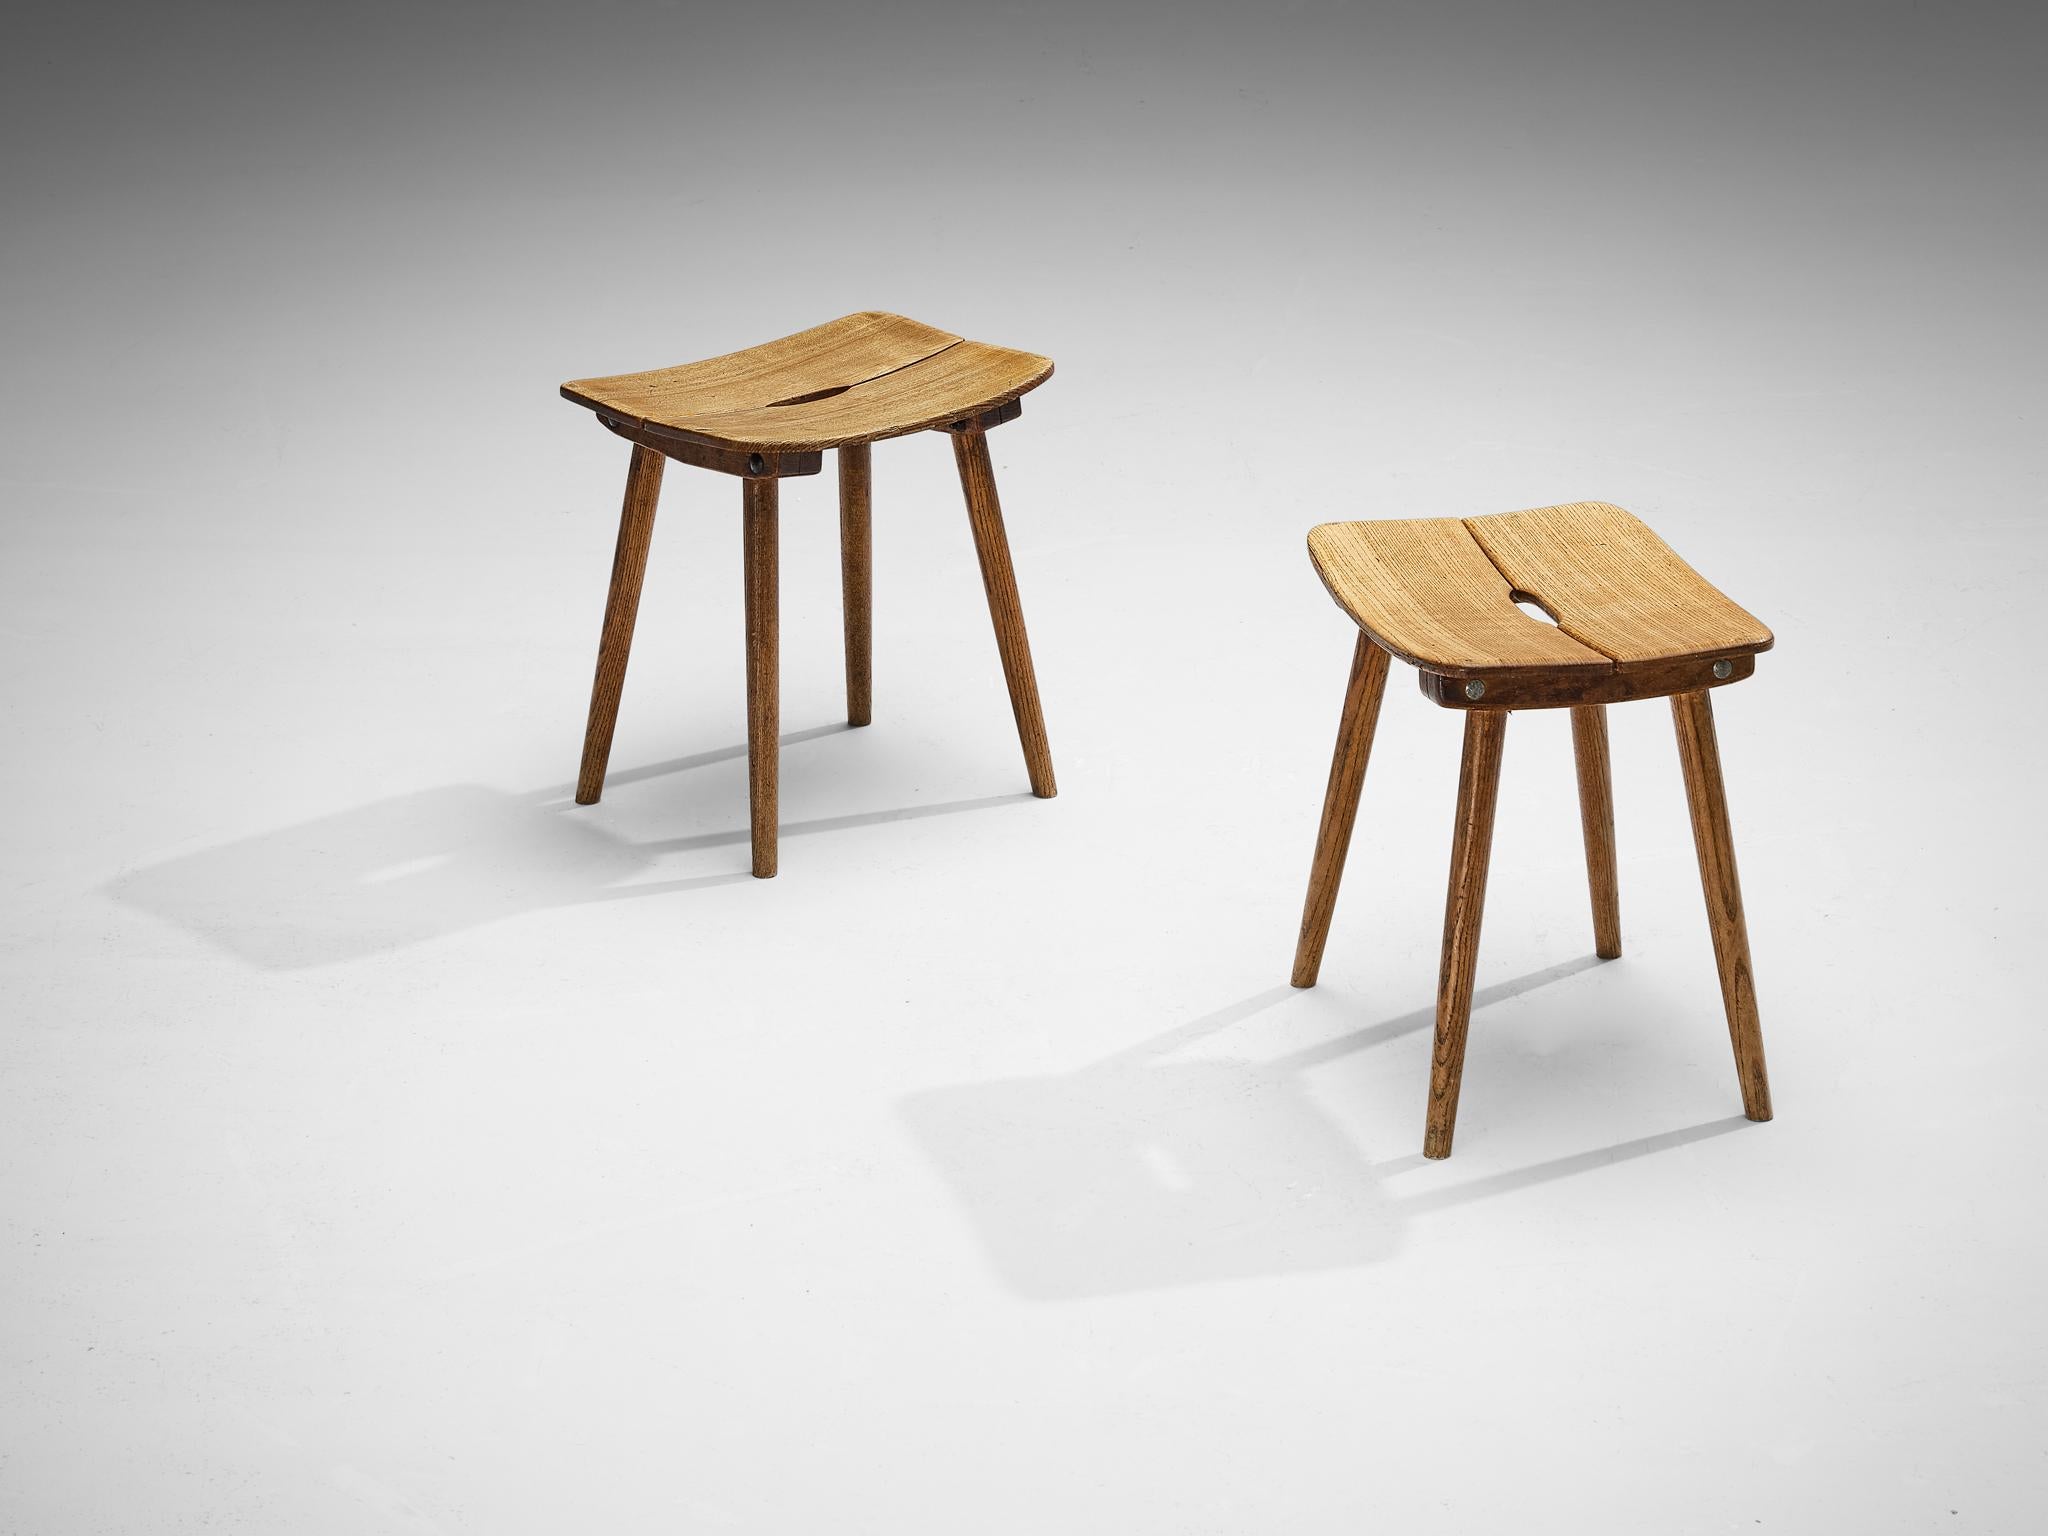 Jacob Müller for Wohnhilfe, stools, ash, Switzerland, production  1945/1960

This stool of Swiss origin is a design by Jacob Müller for Wohnhilfe and was in production from 1945 until 1960. The design is simple yet refined in its construction. The